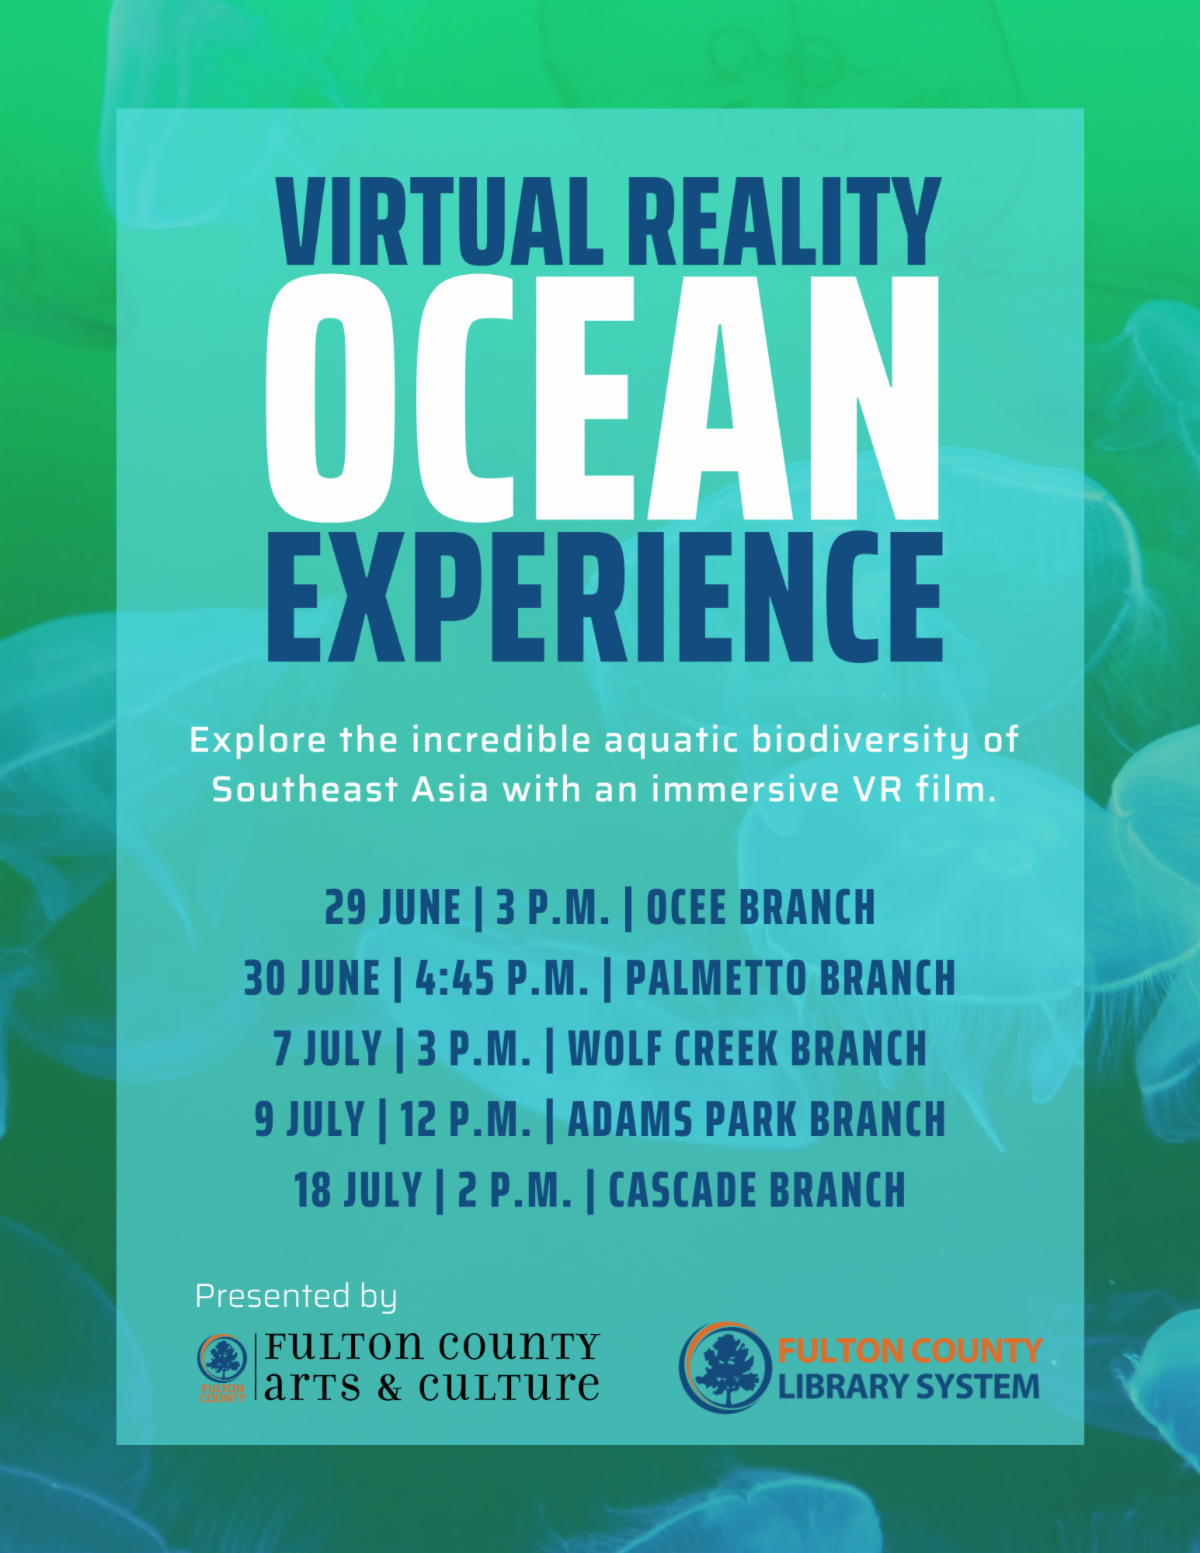 A flyer about VR ocean experience